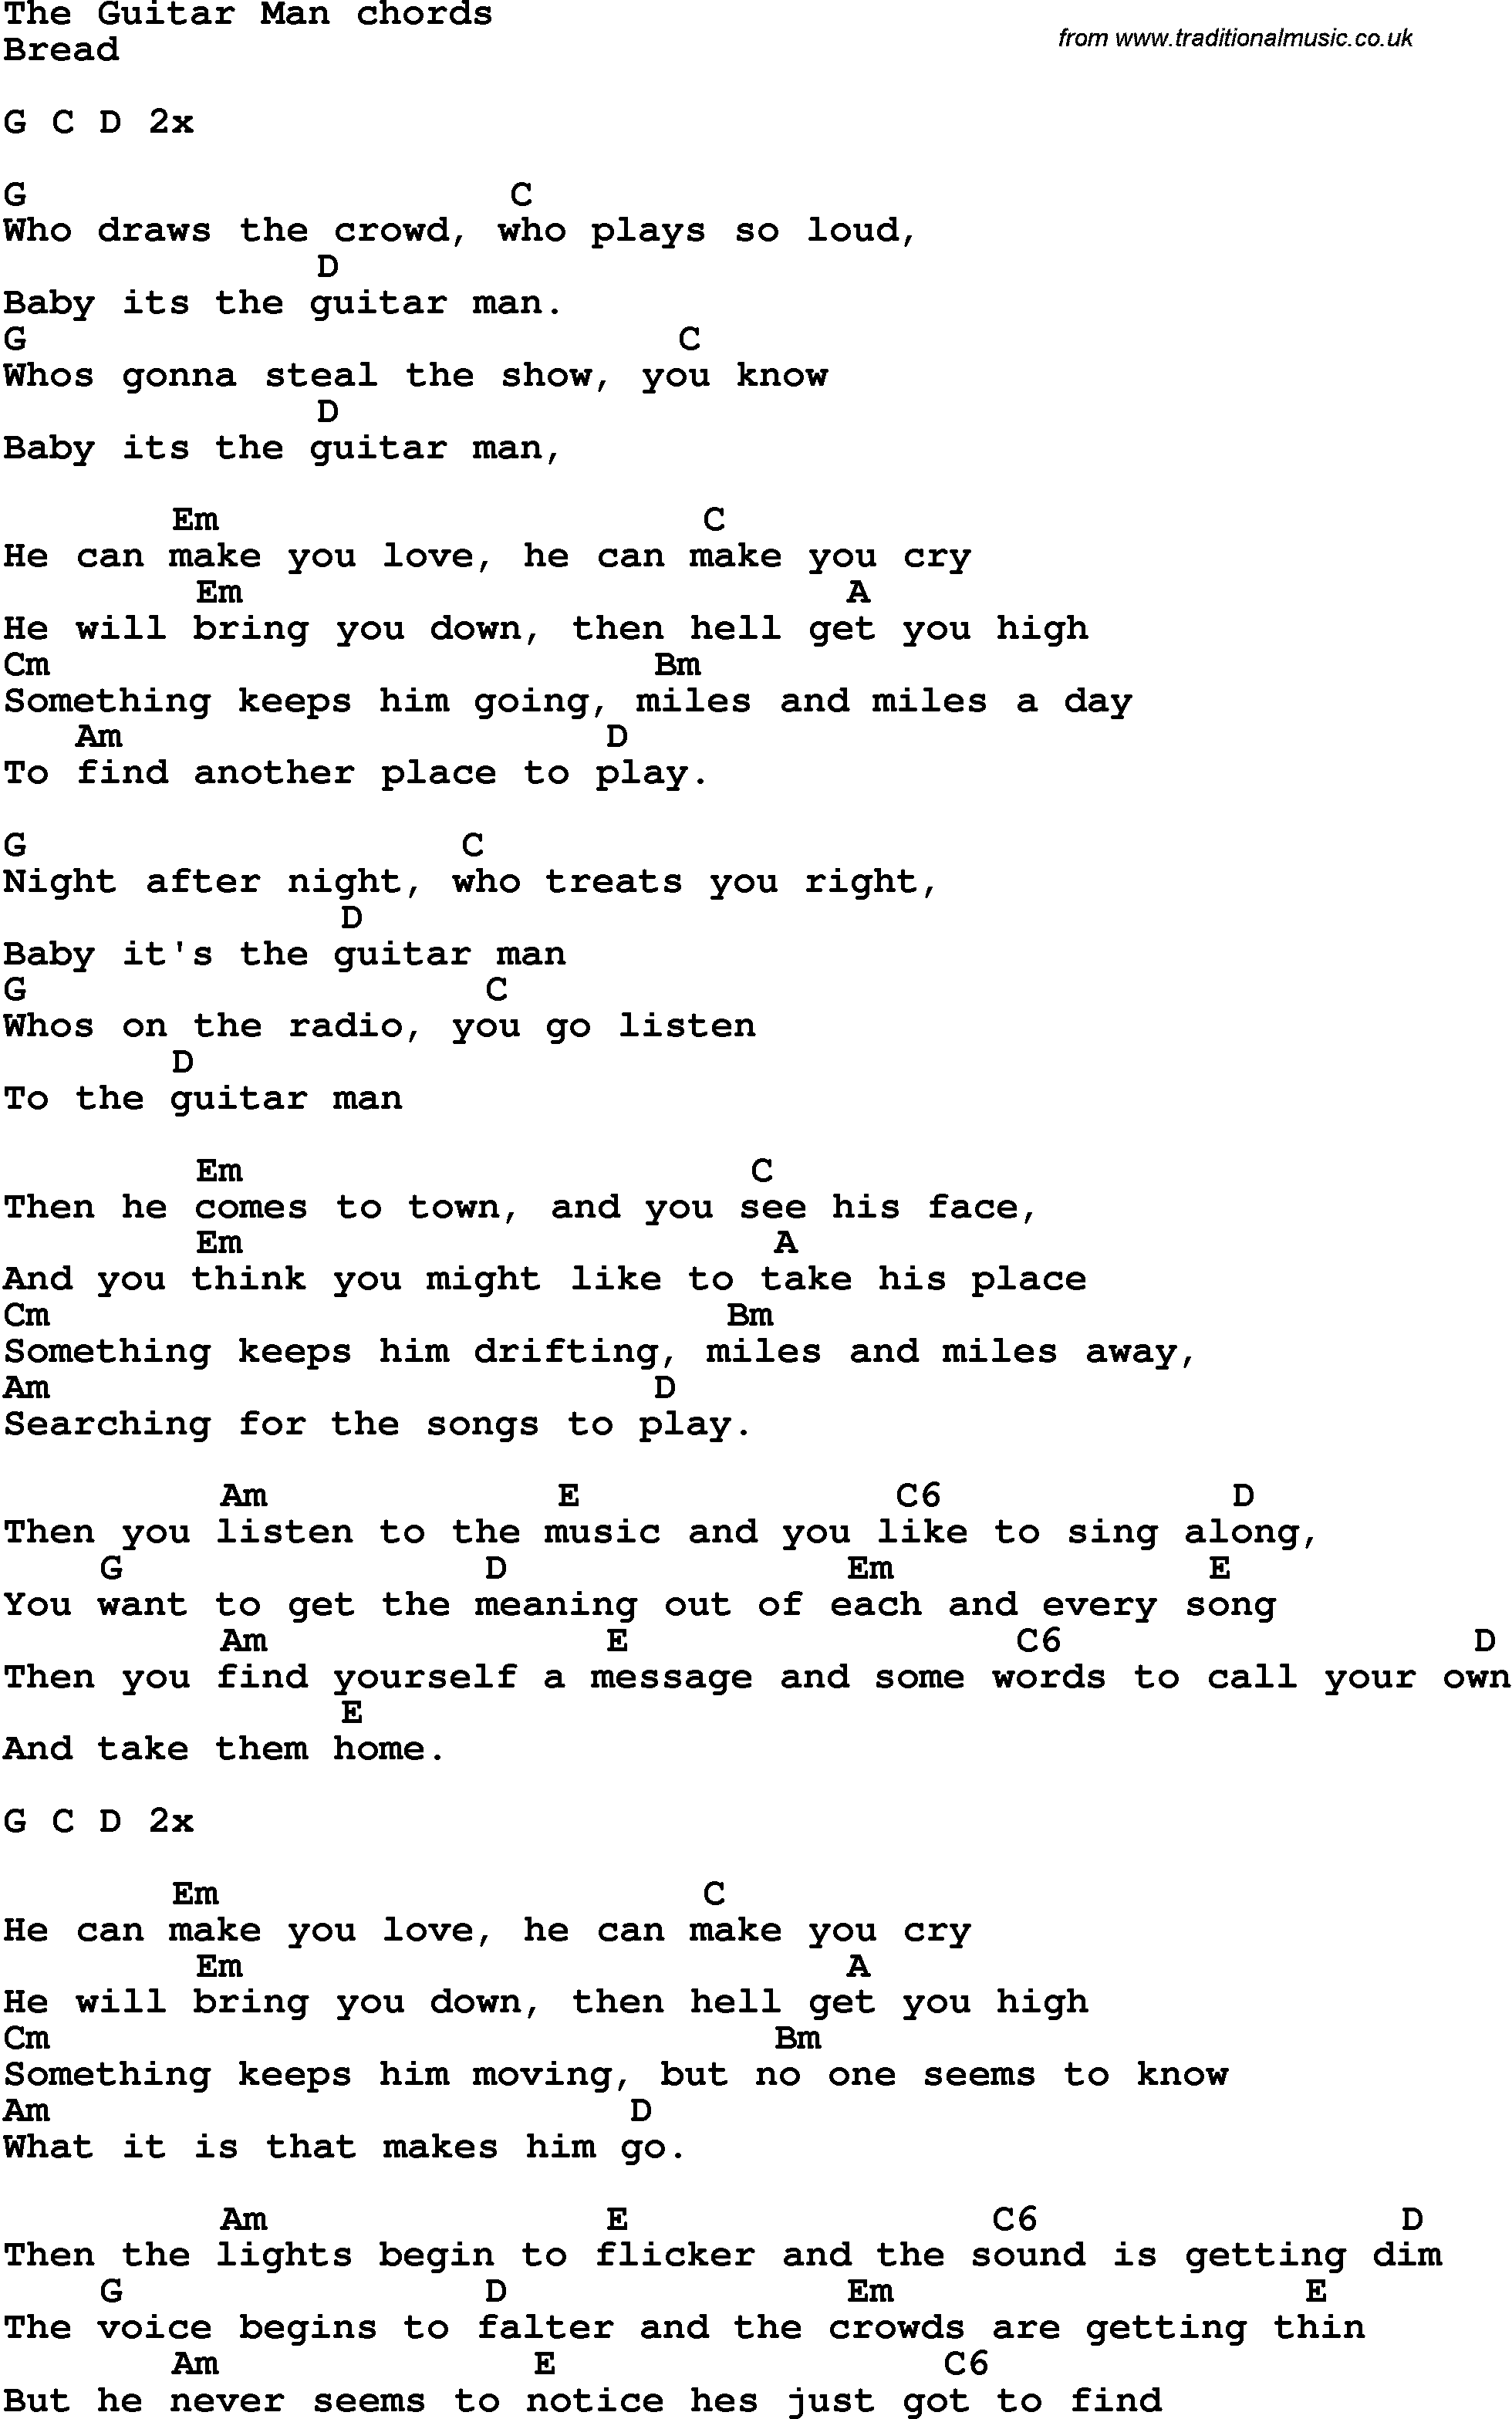 Song Lyrics with guitar chords for The Guitar Manecdf